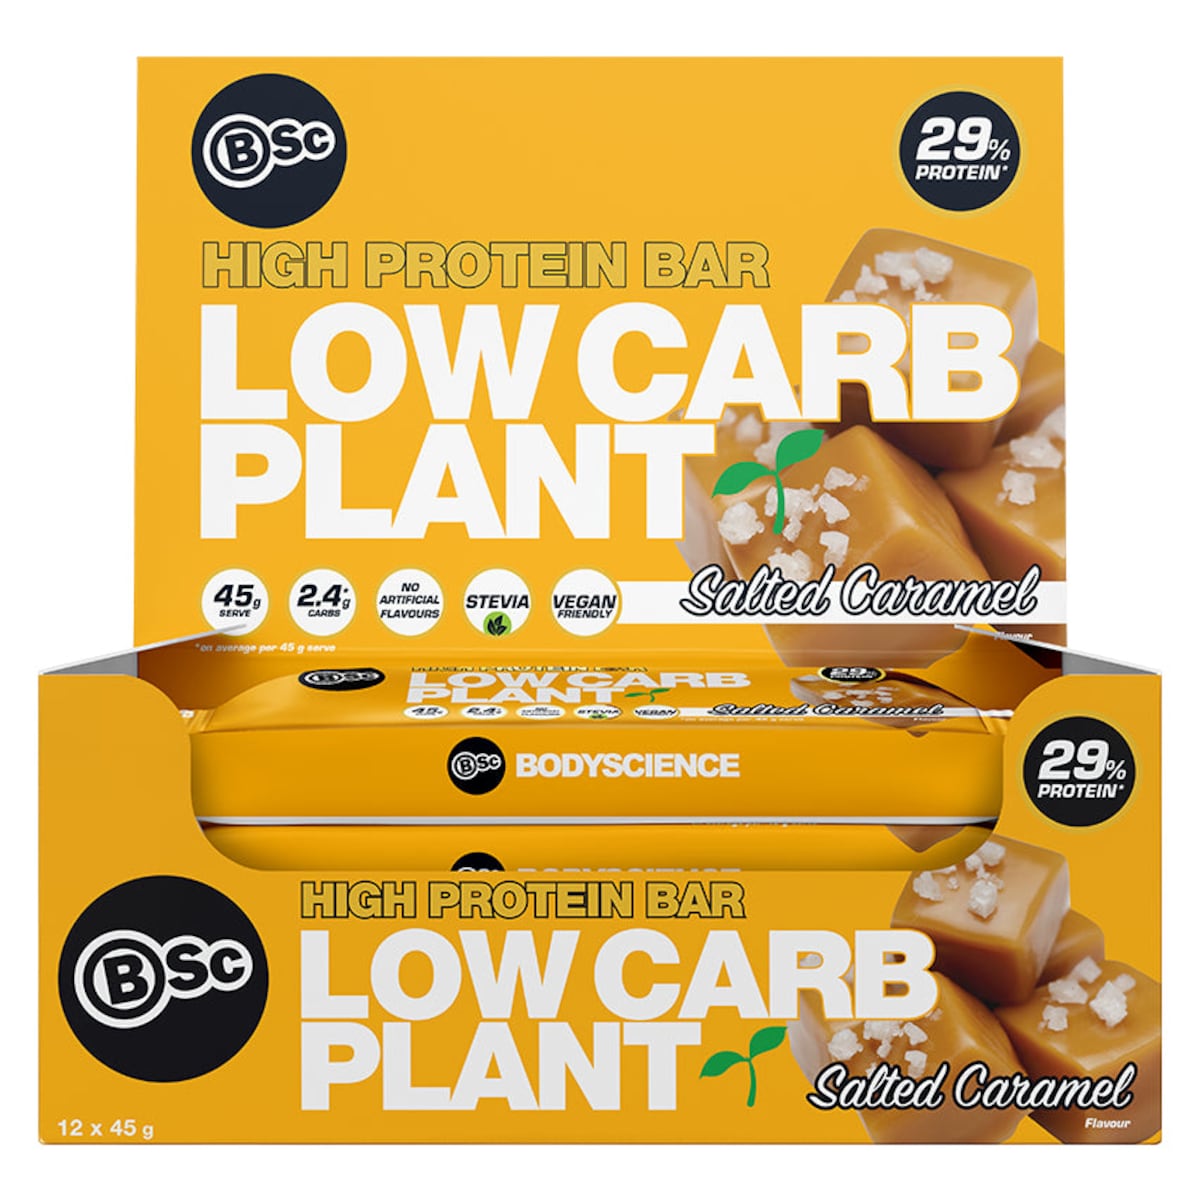 BSc Body Science High Protein Low Carb Plant Bar Salted Caramel 12 x